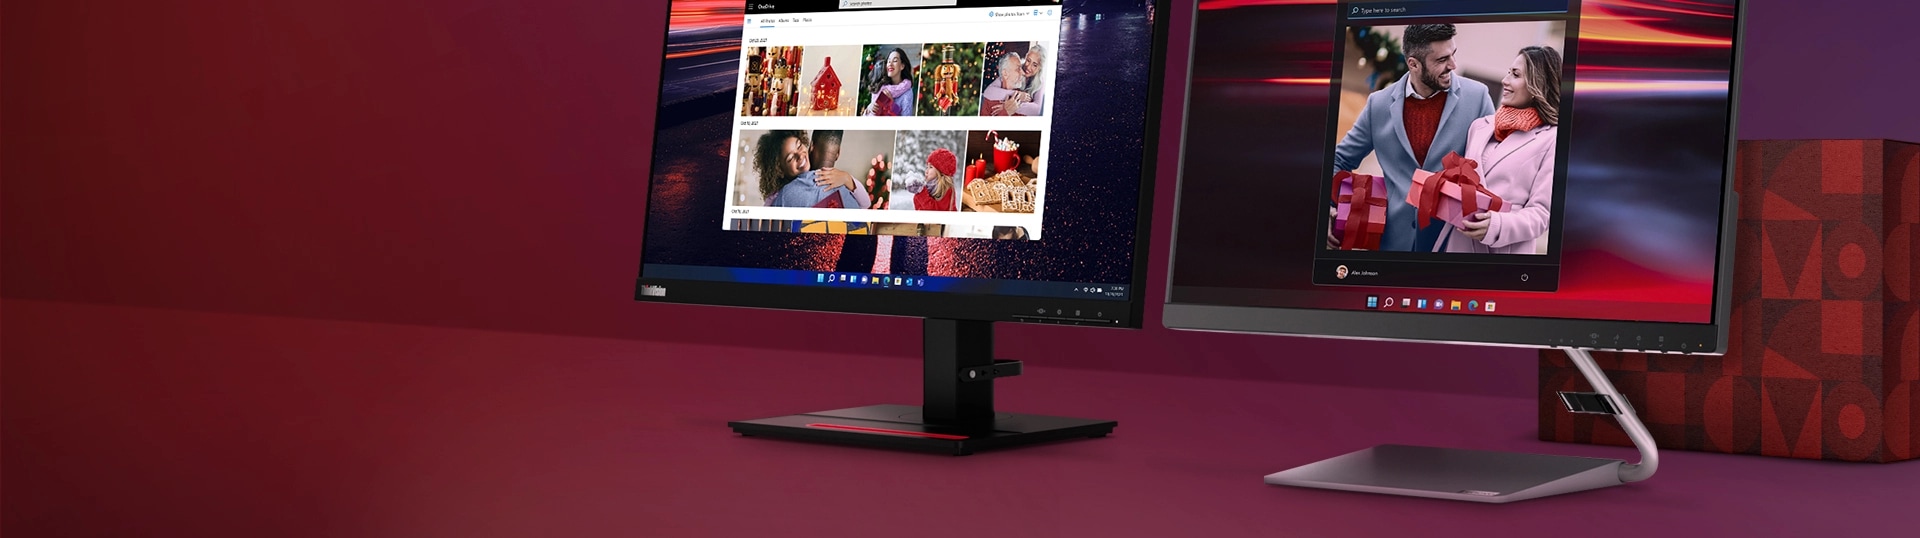 2 monitors with family screenfills next to a red gift box.